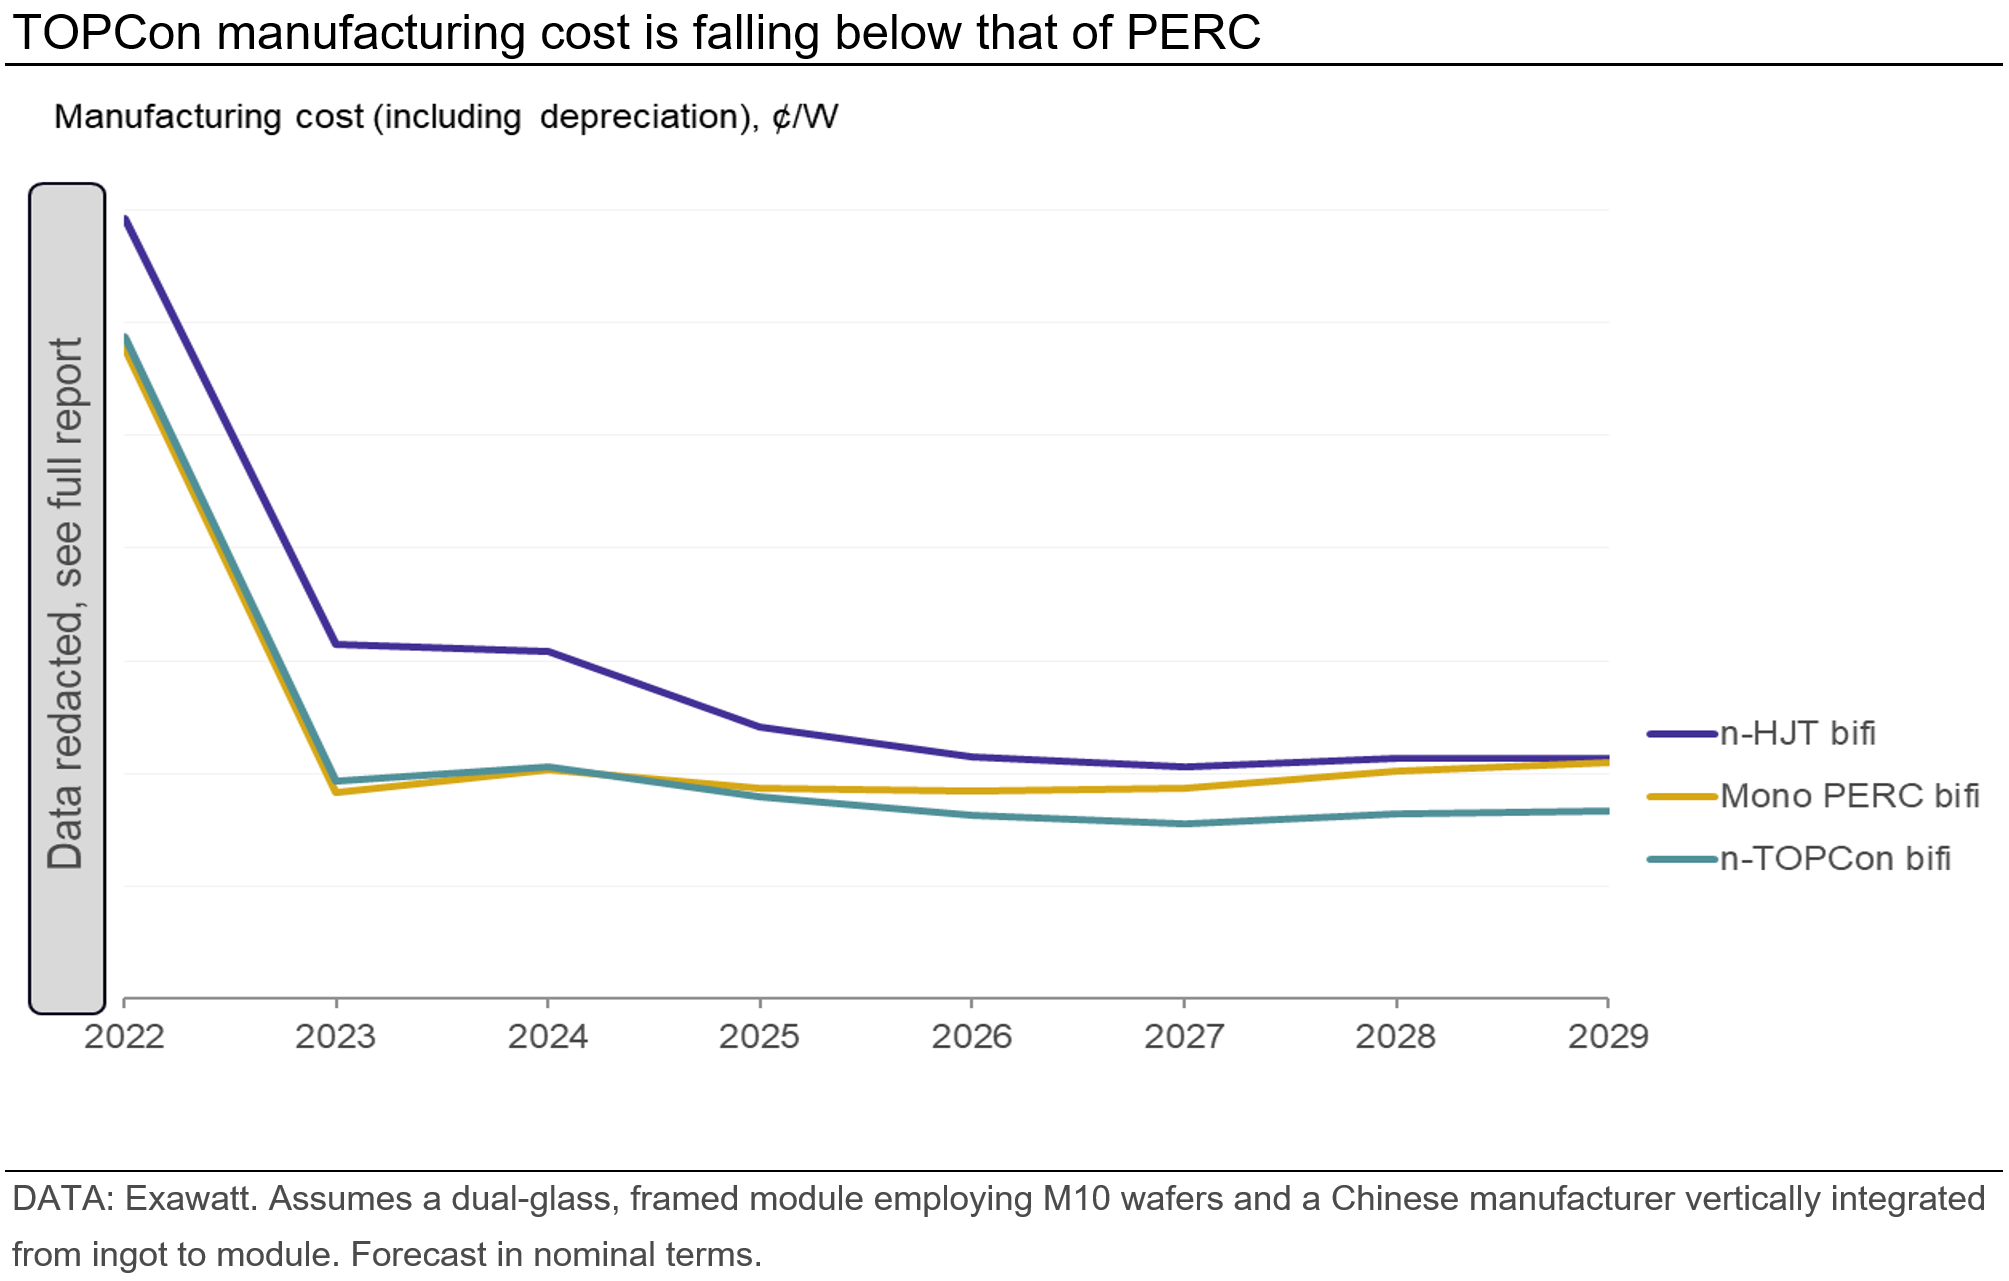 Graph showing that TOPCon manufacturing cost is falling below that of PERC